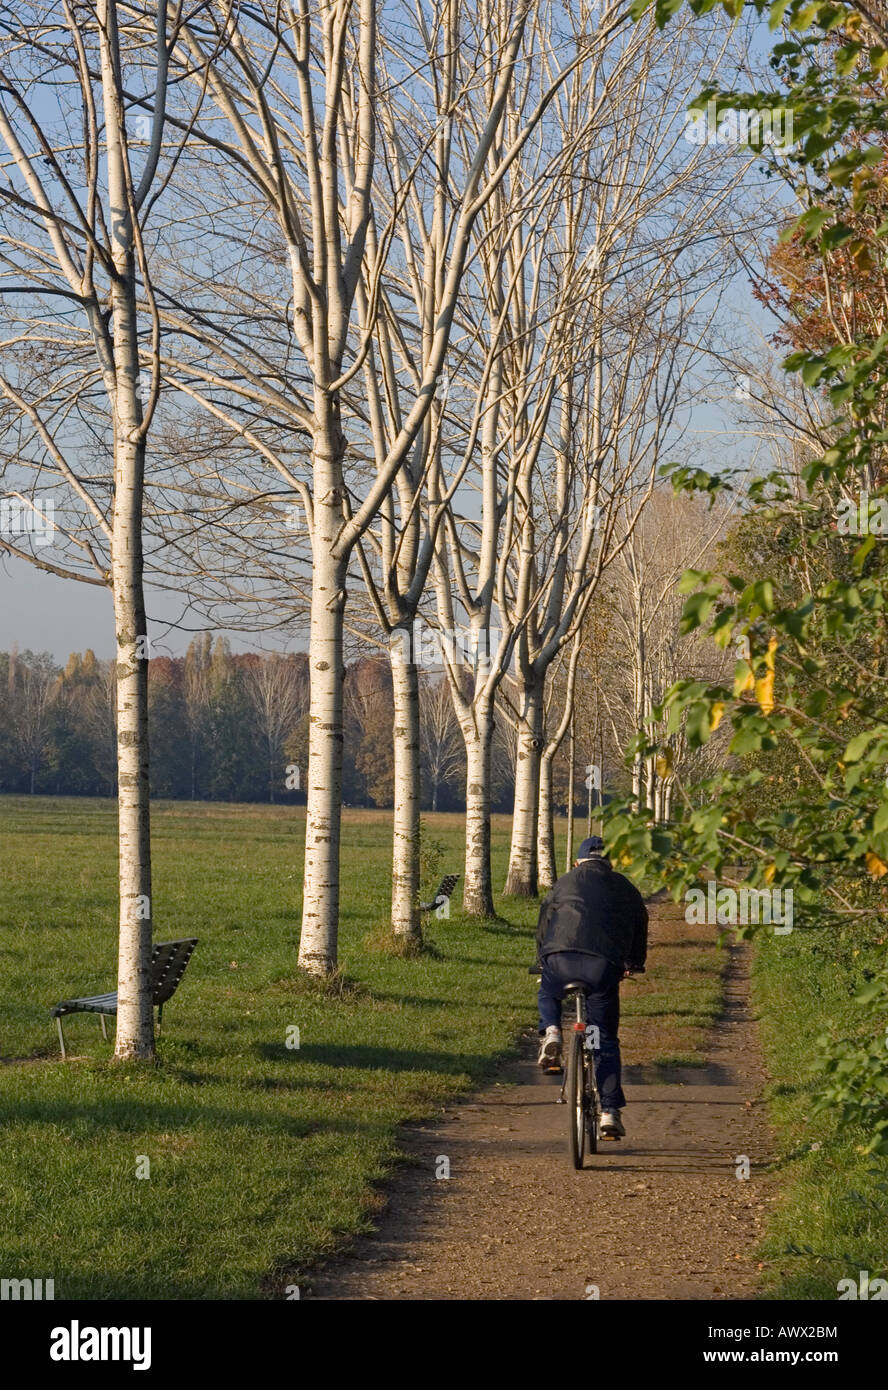 cycling in urban park in autumn Parco Nord Milano Milan Italy Stock Photo